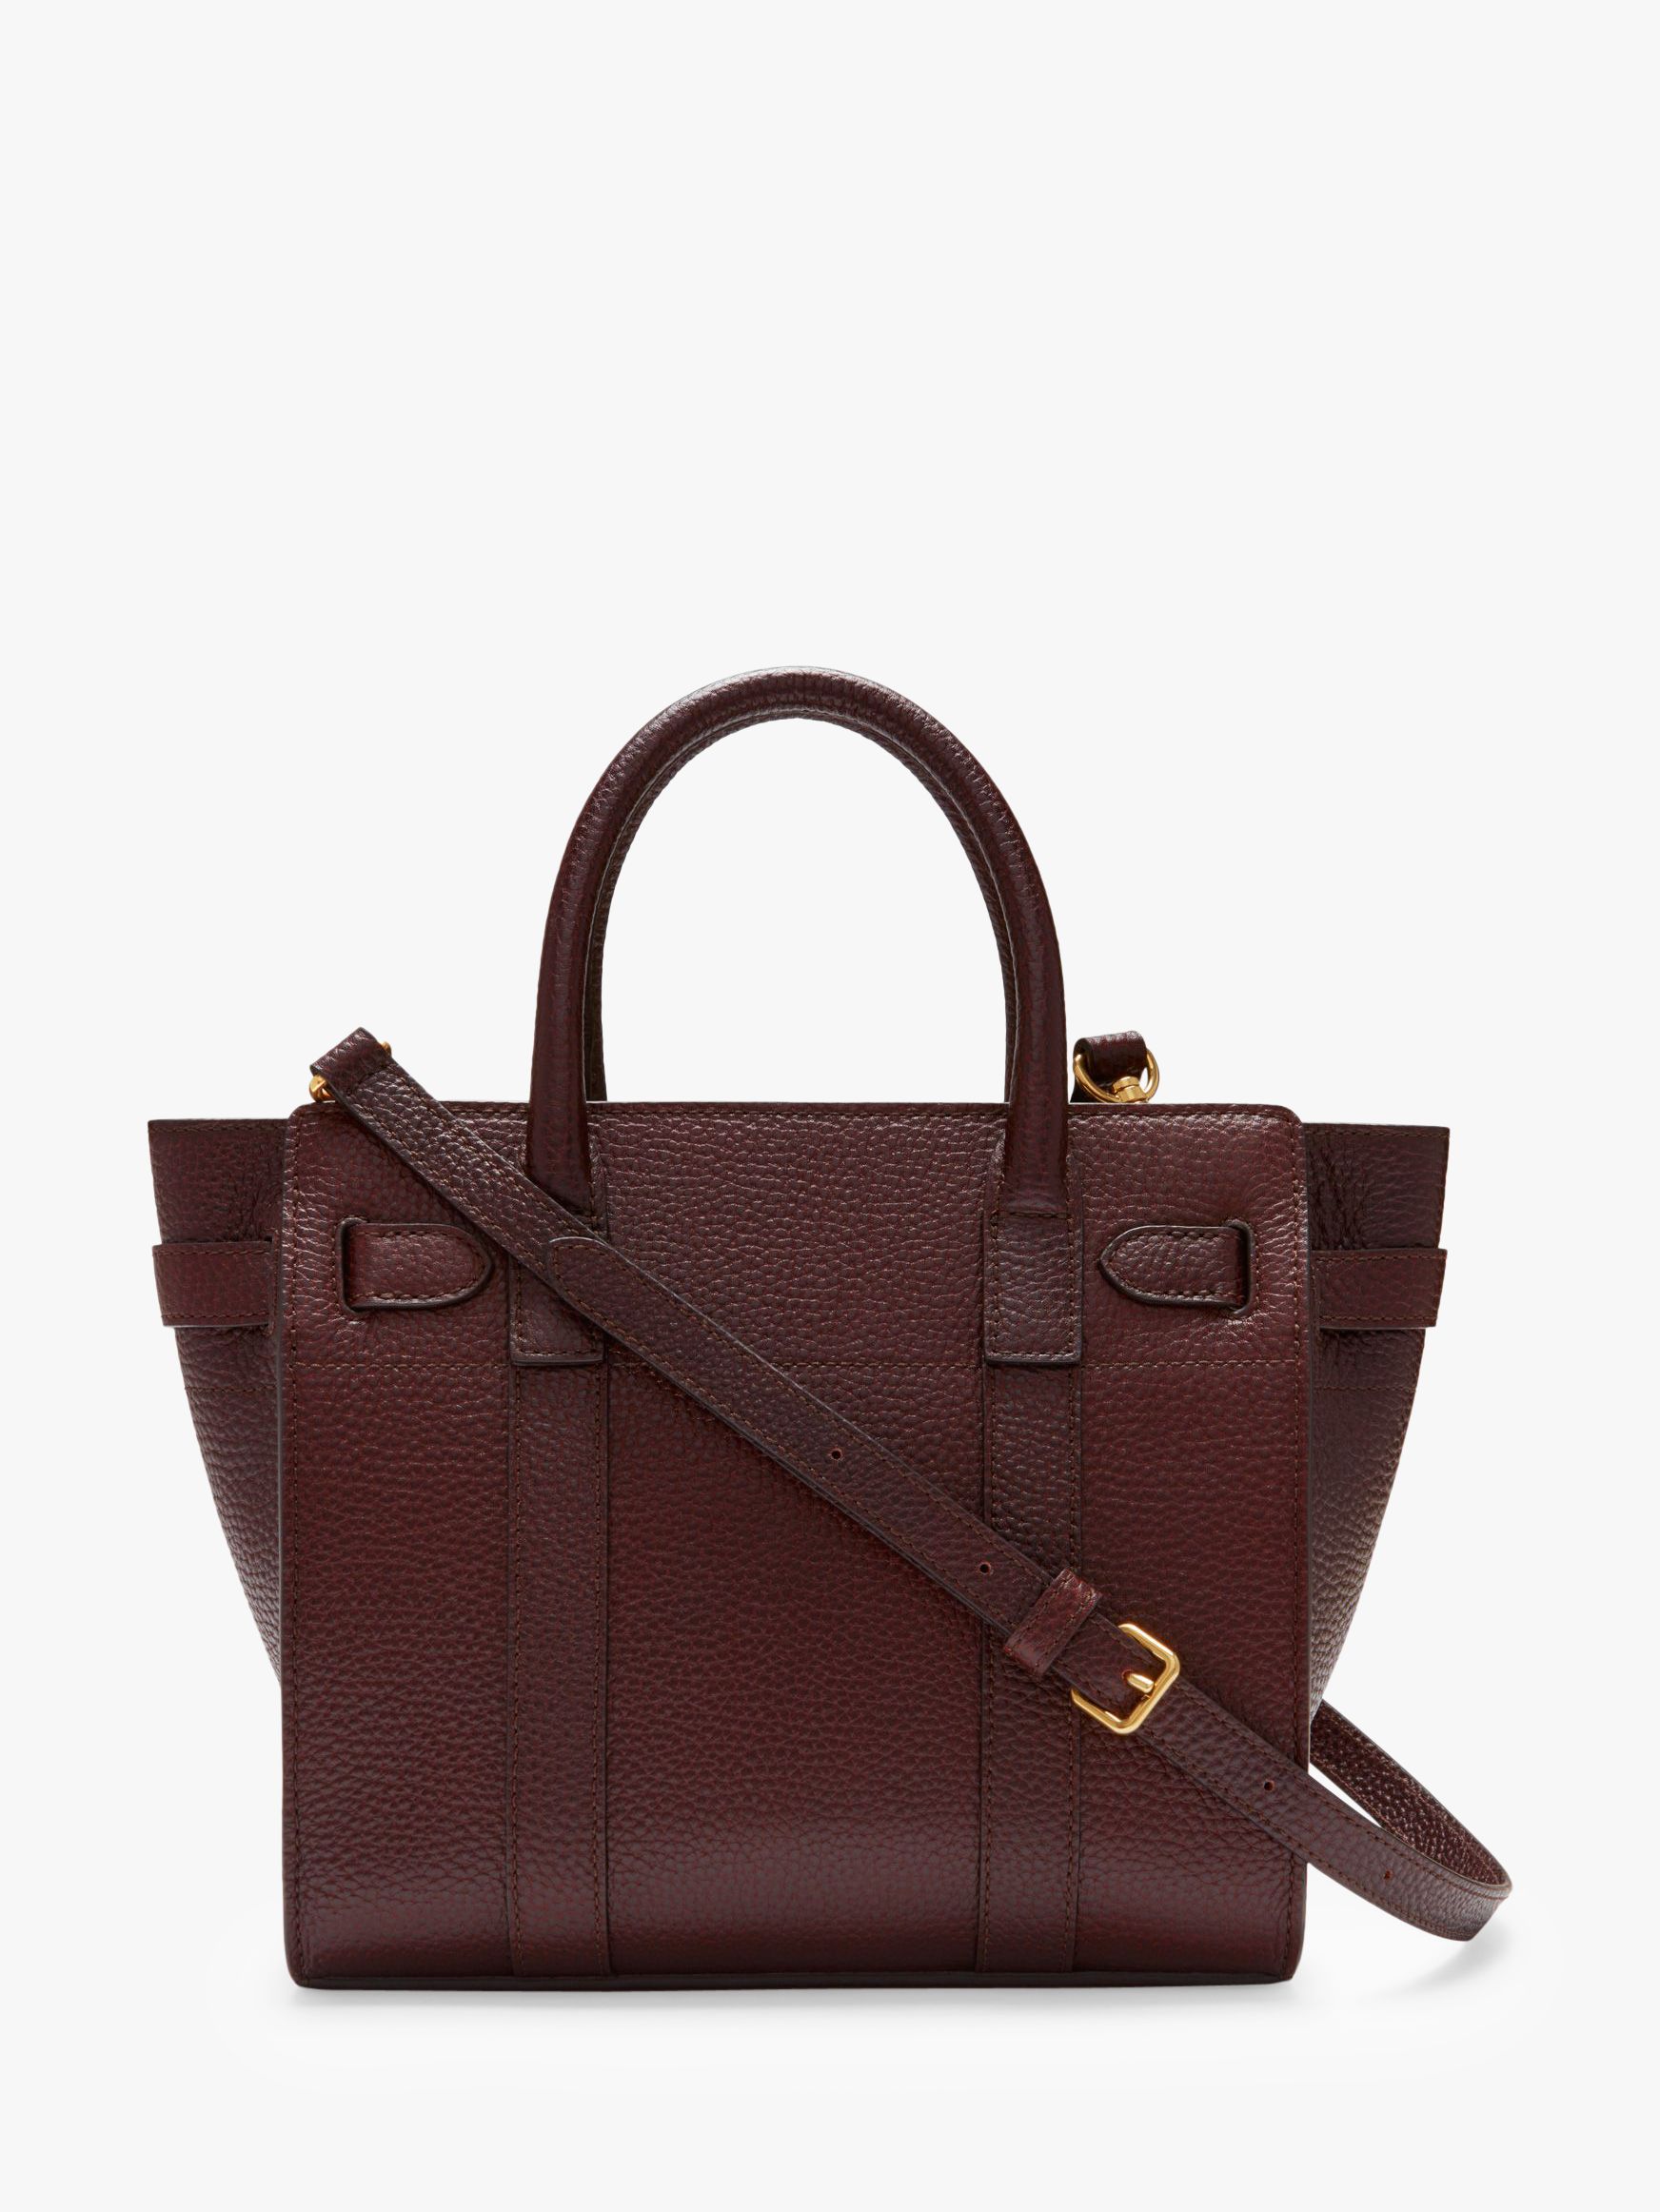 Mulberry Mini Bayswater Zipped Grain Veg Tanned Leather Tote Bag ...